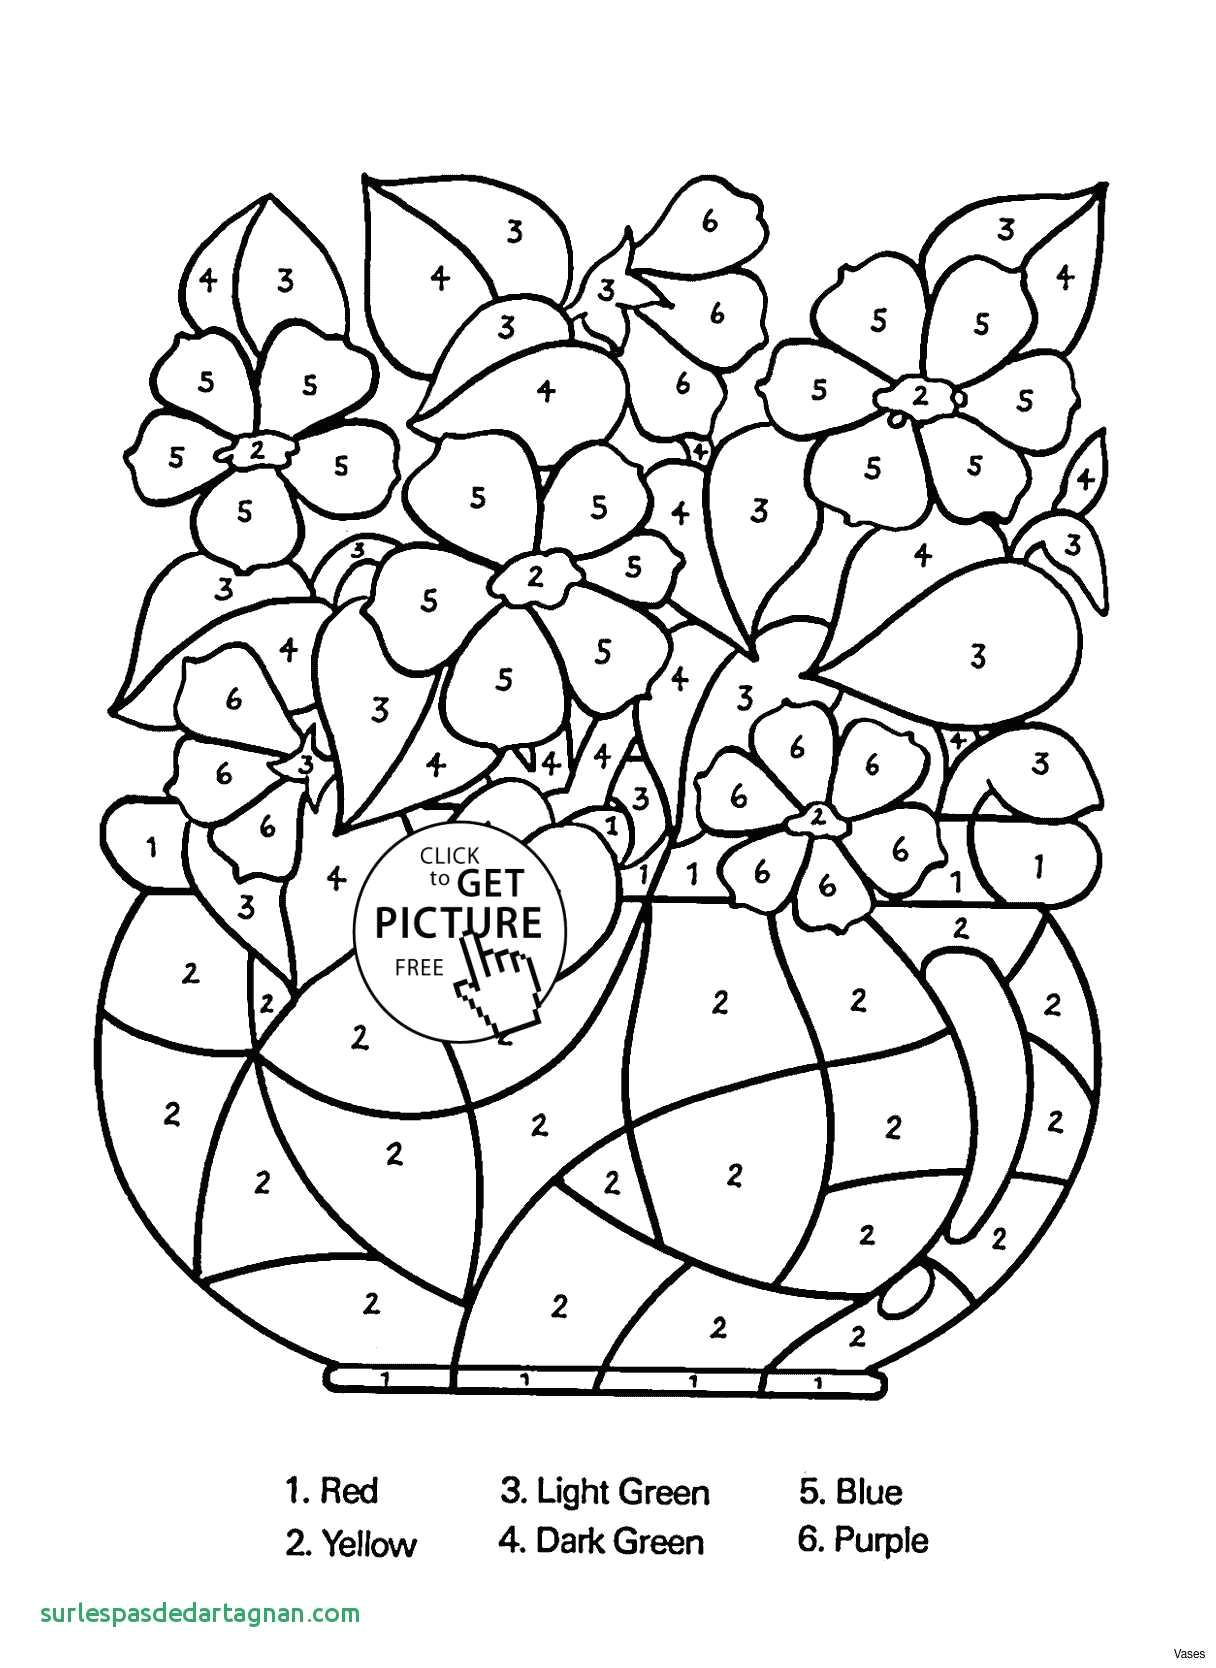 Drawing Ideas Vase Awesome Cool Patterns Black and White Easy to Draw Www Pantry